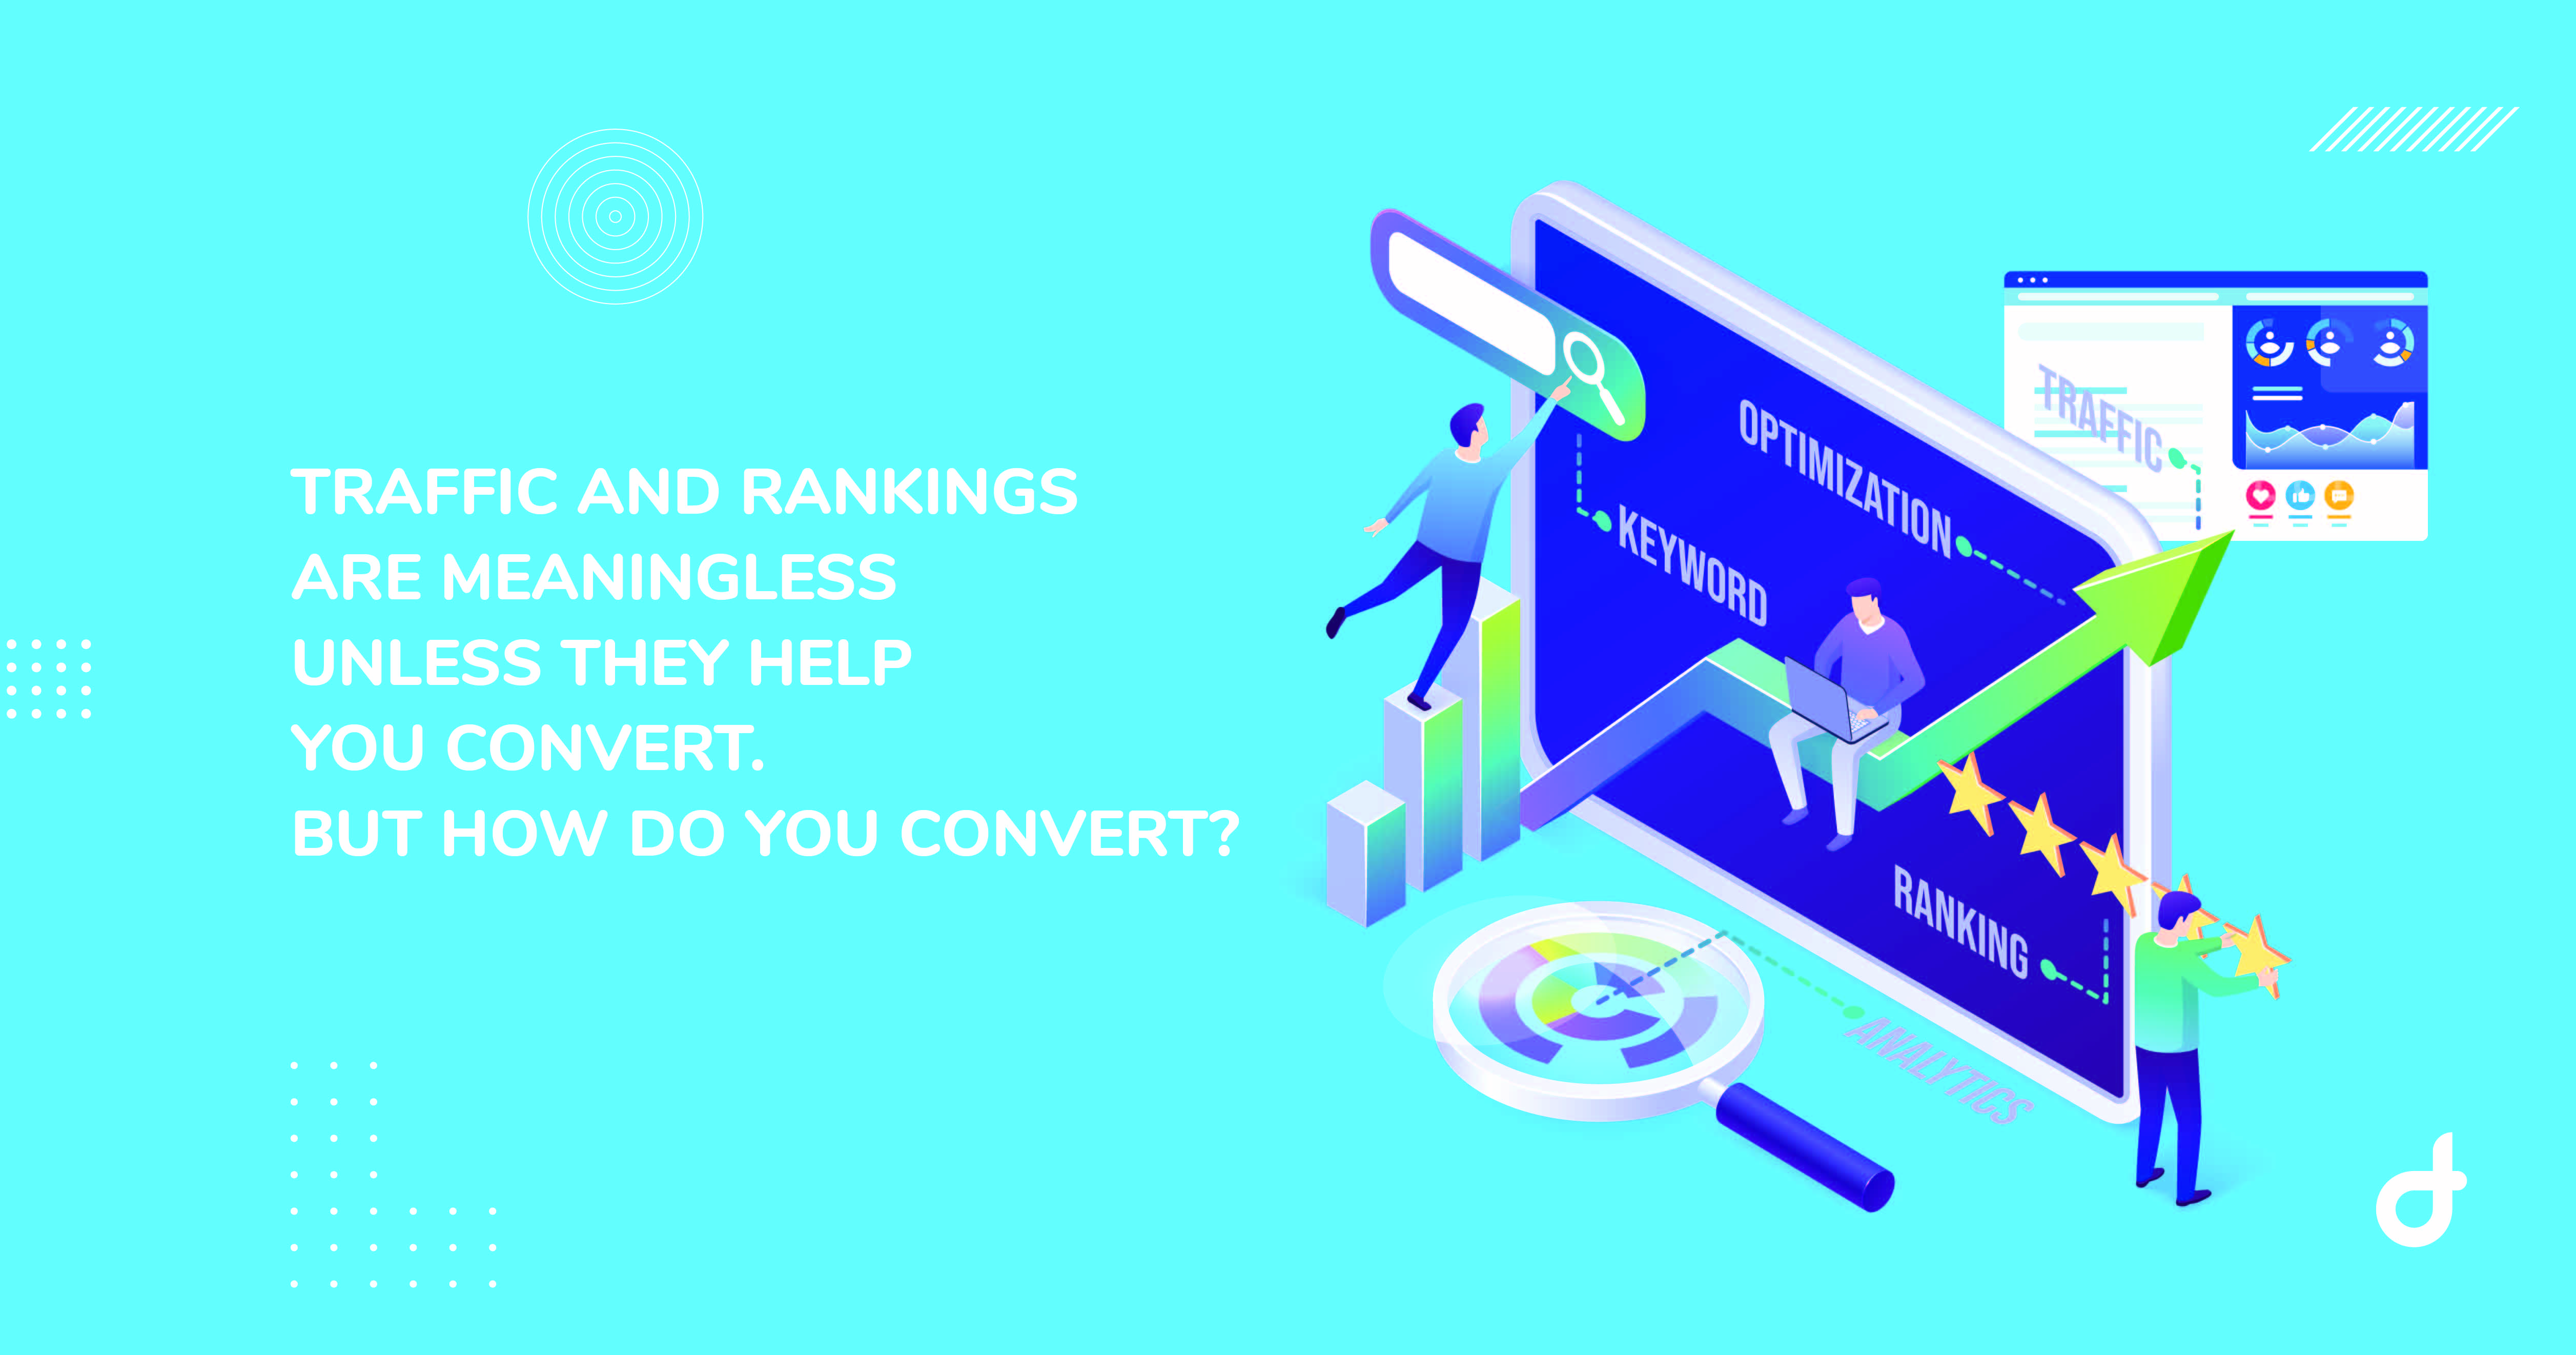 traffic-and-rankings-are-meaningless-unless-they-help-you-convert-but-how-do-you-convert